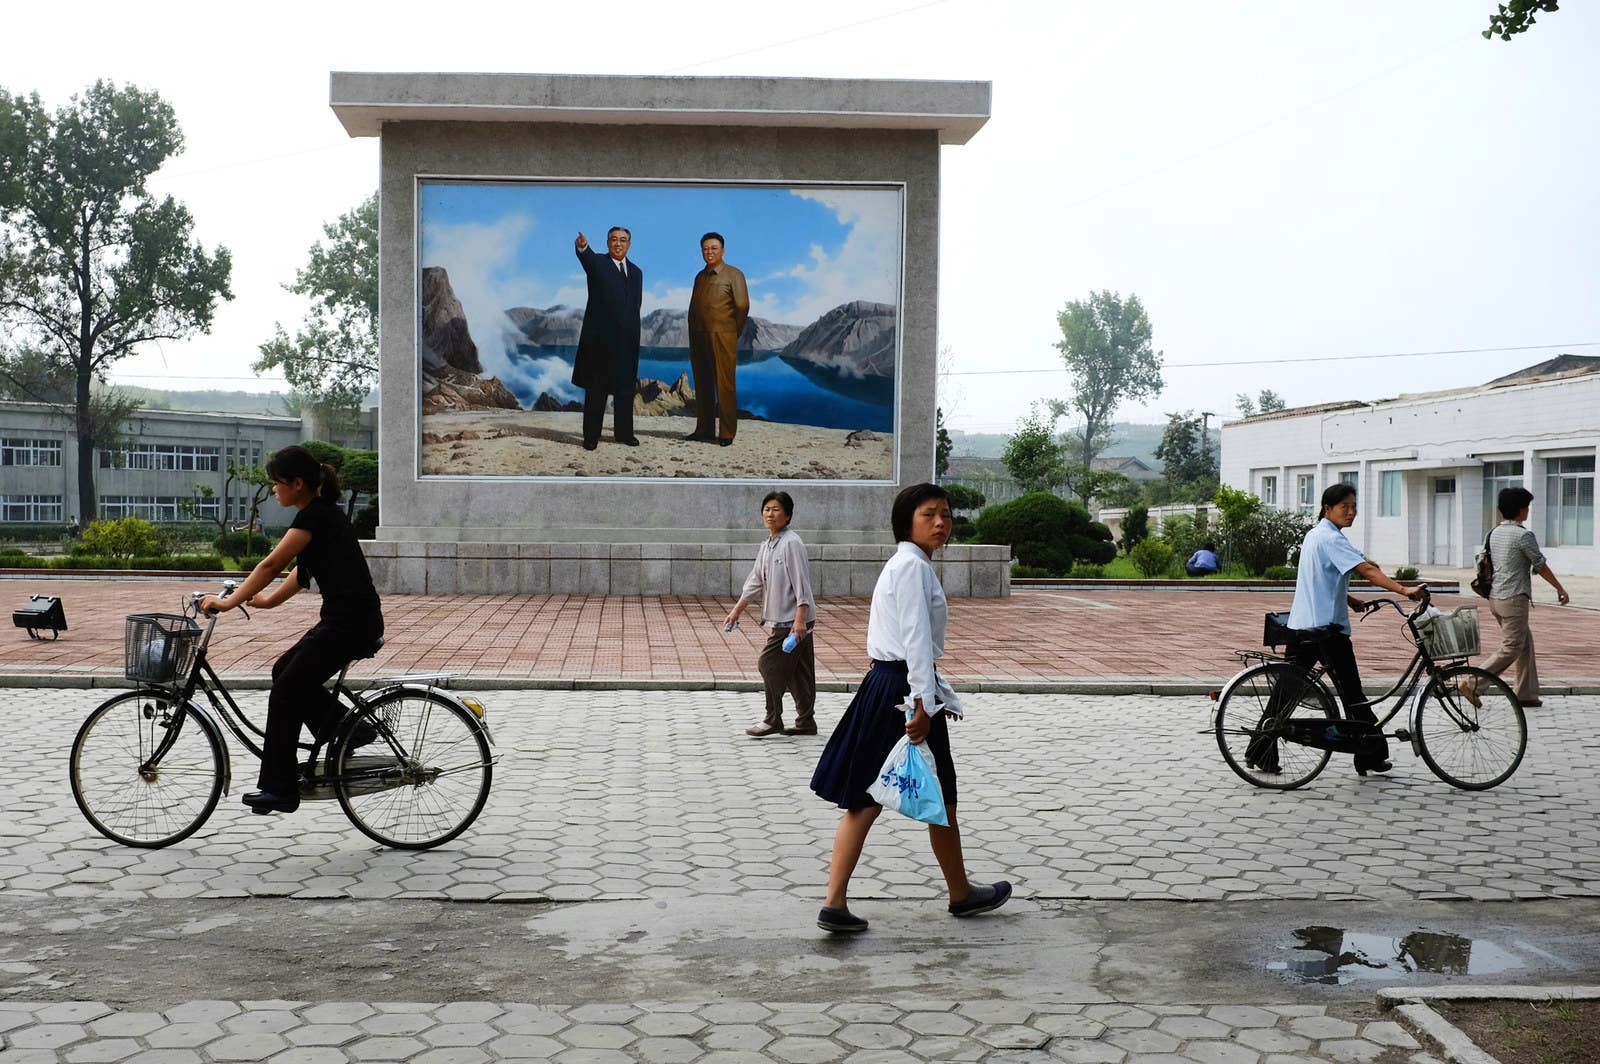 People in provincial North Korea pass before a mural of the leaders standing upon the North Korean "sacred mountain" of Mount Paektu.